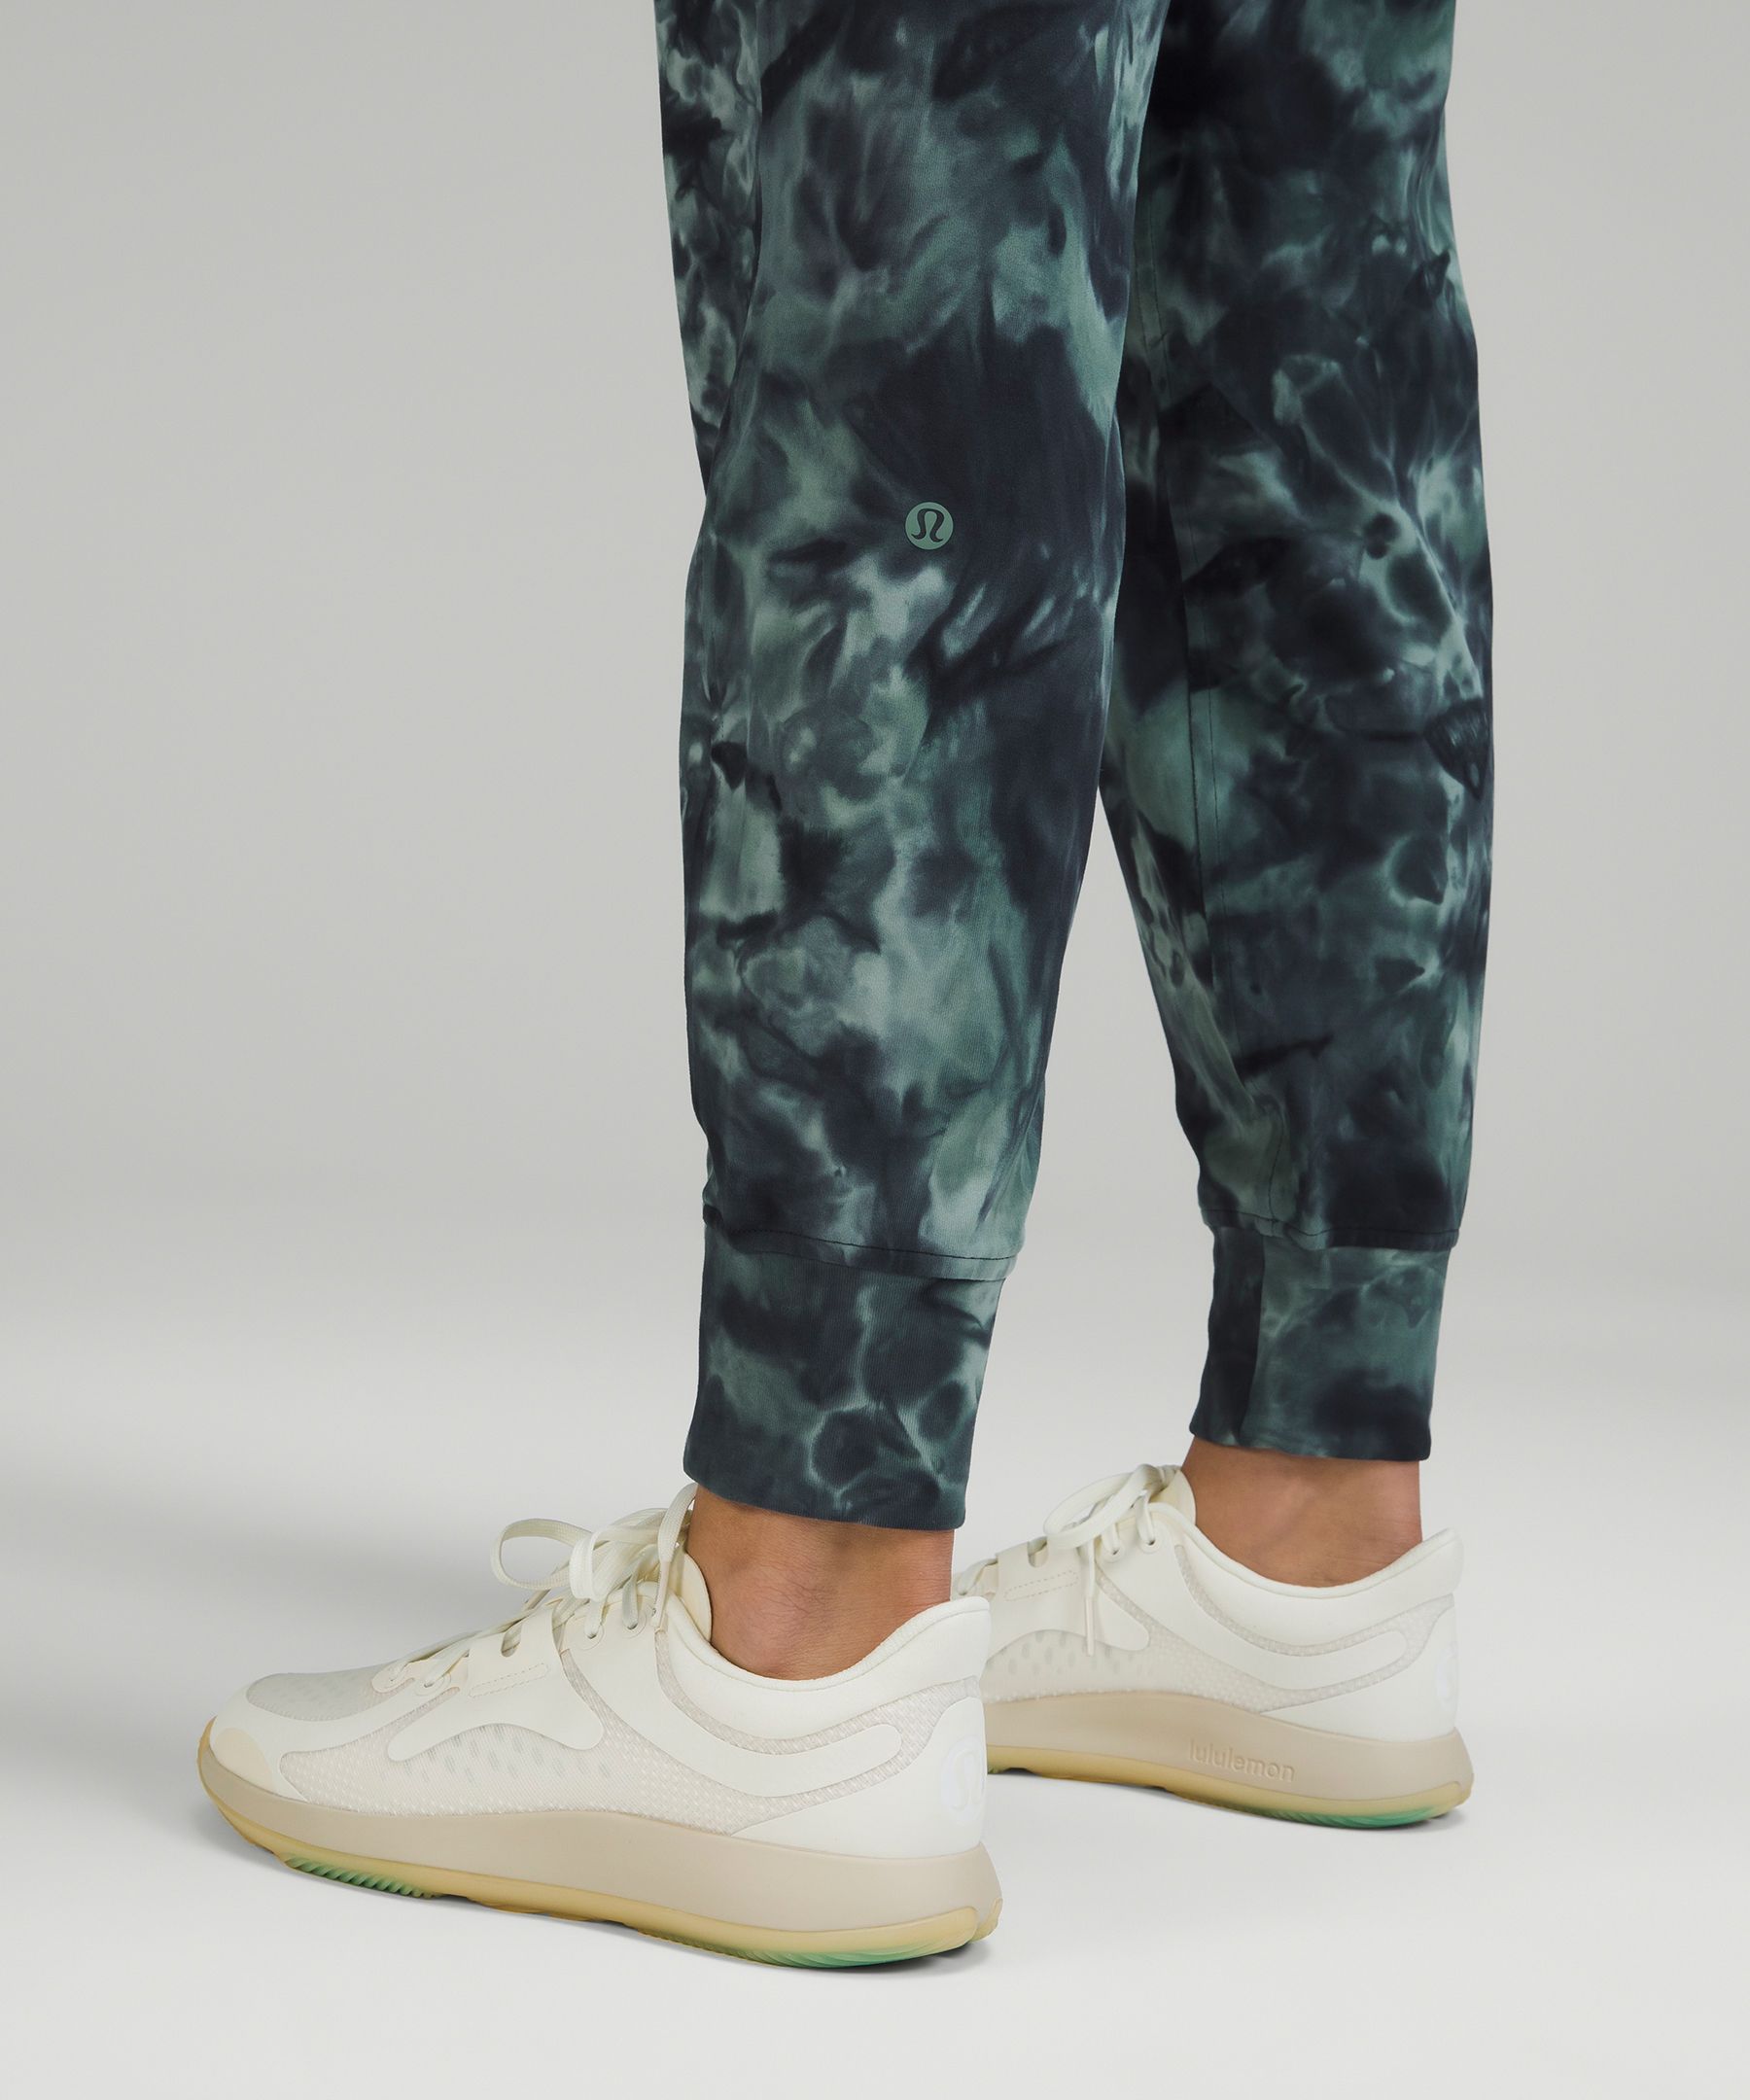 Ready to Rulu High-Rise Jogger *Full Length